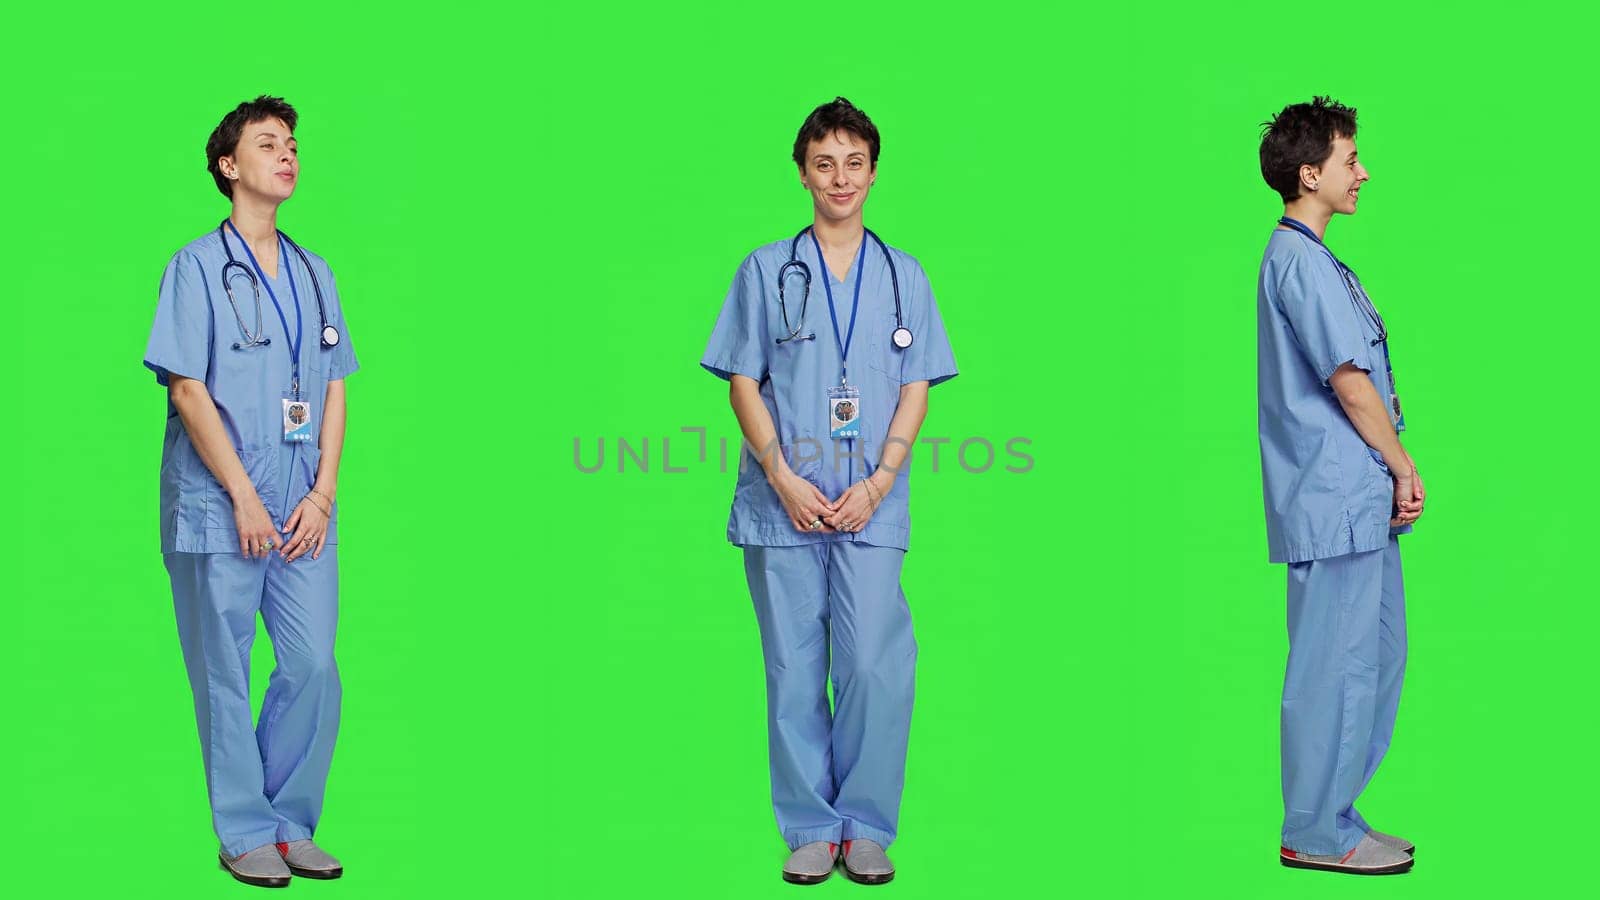 Portrait of medical assistant smiling and posing with confidence, standing against greenscreen backdrop. Nurse wears blue scrubs and stethoscope, feeling successful with health expertise. Camera A.